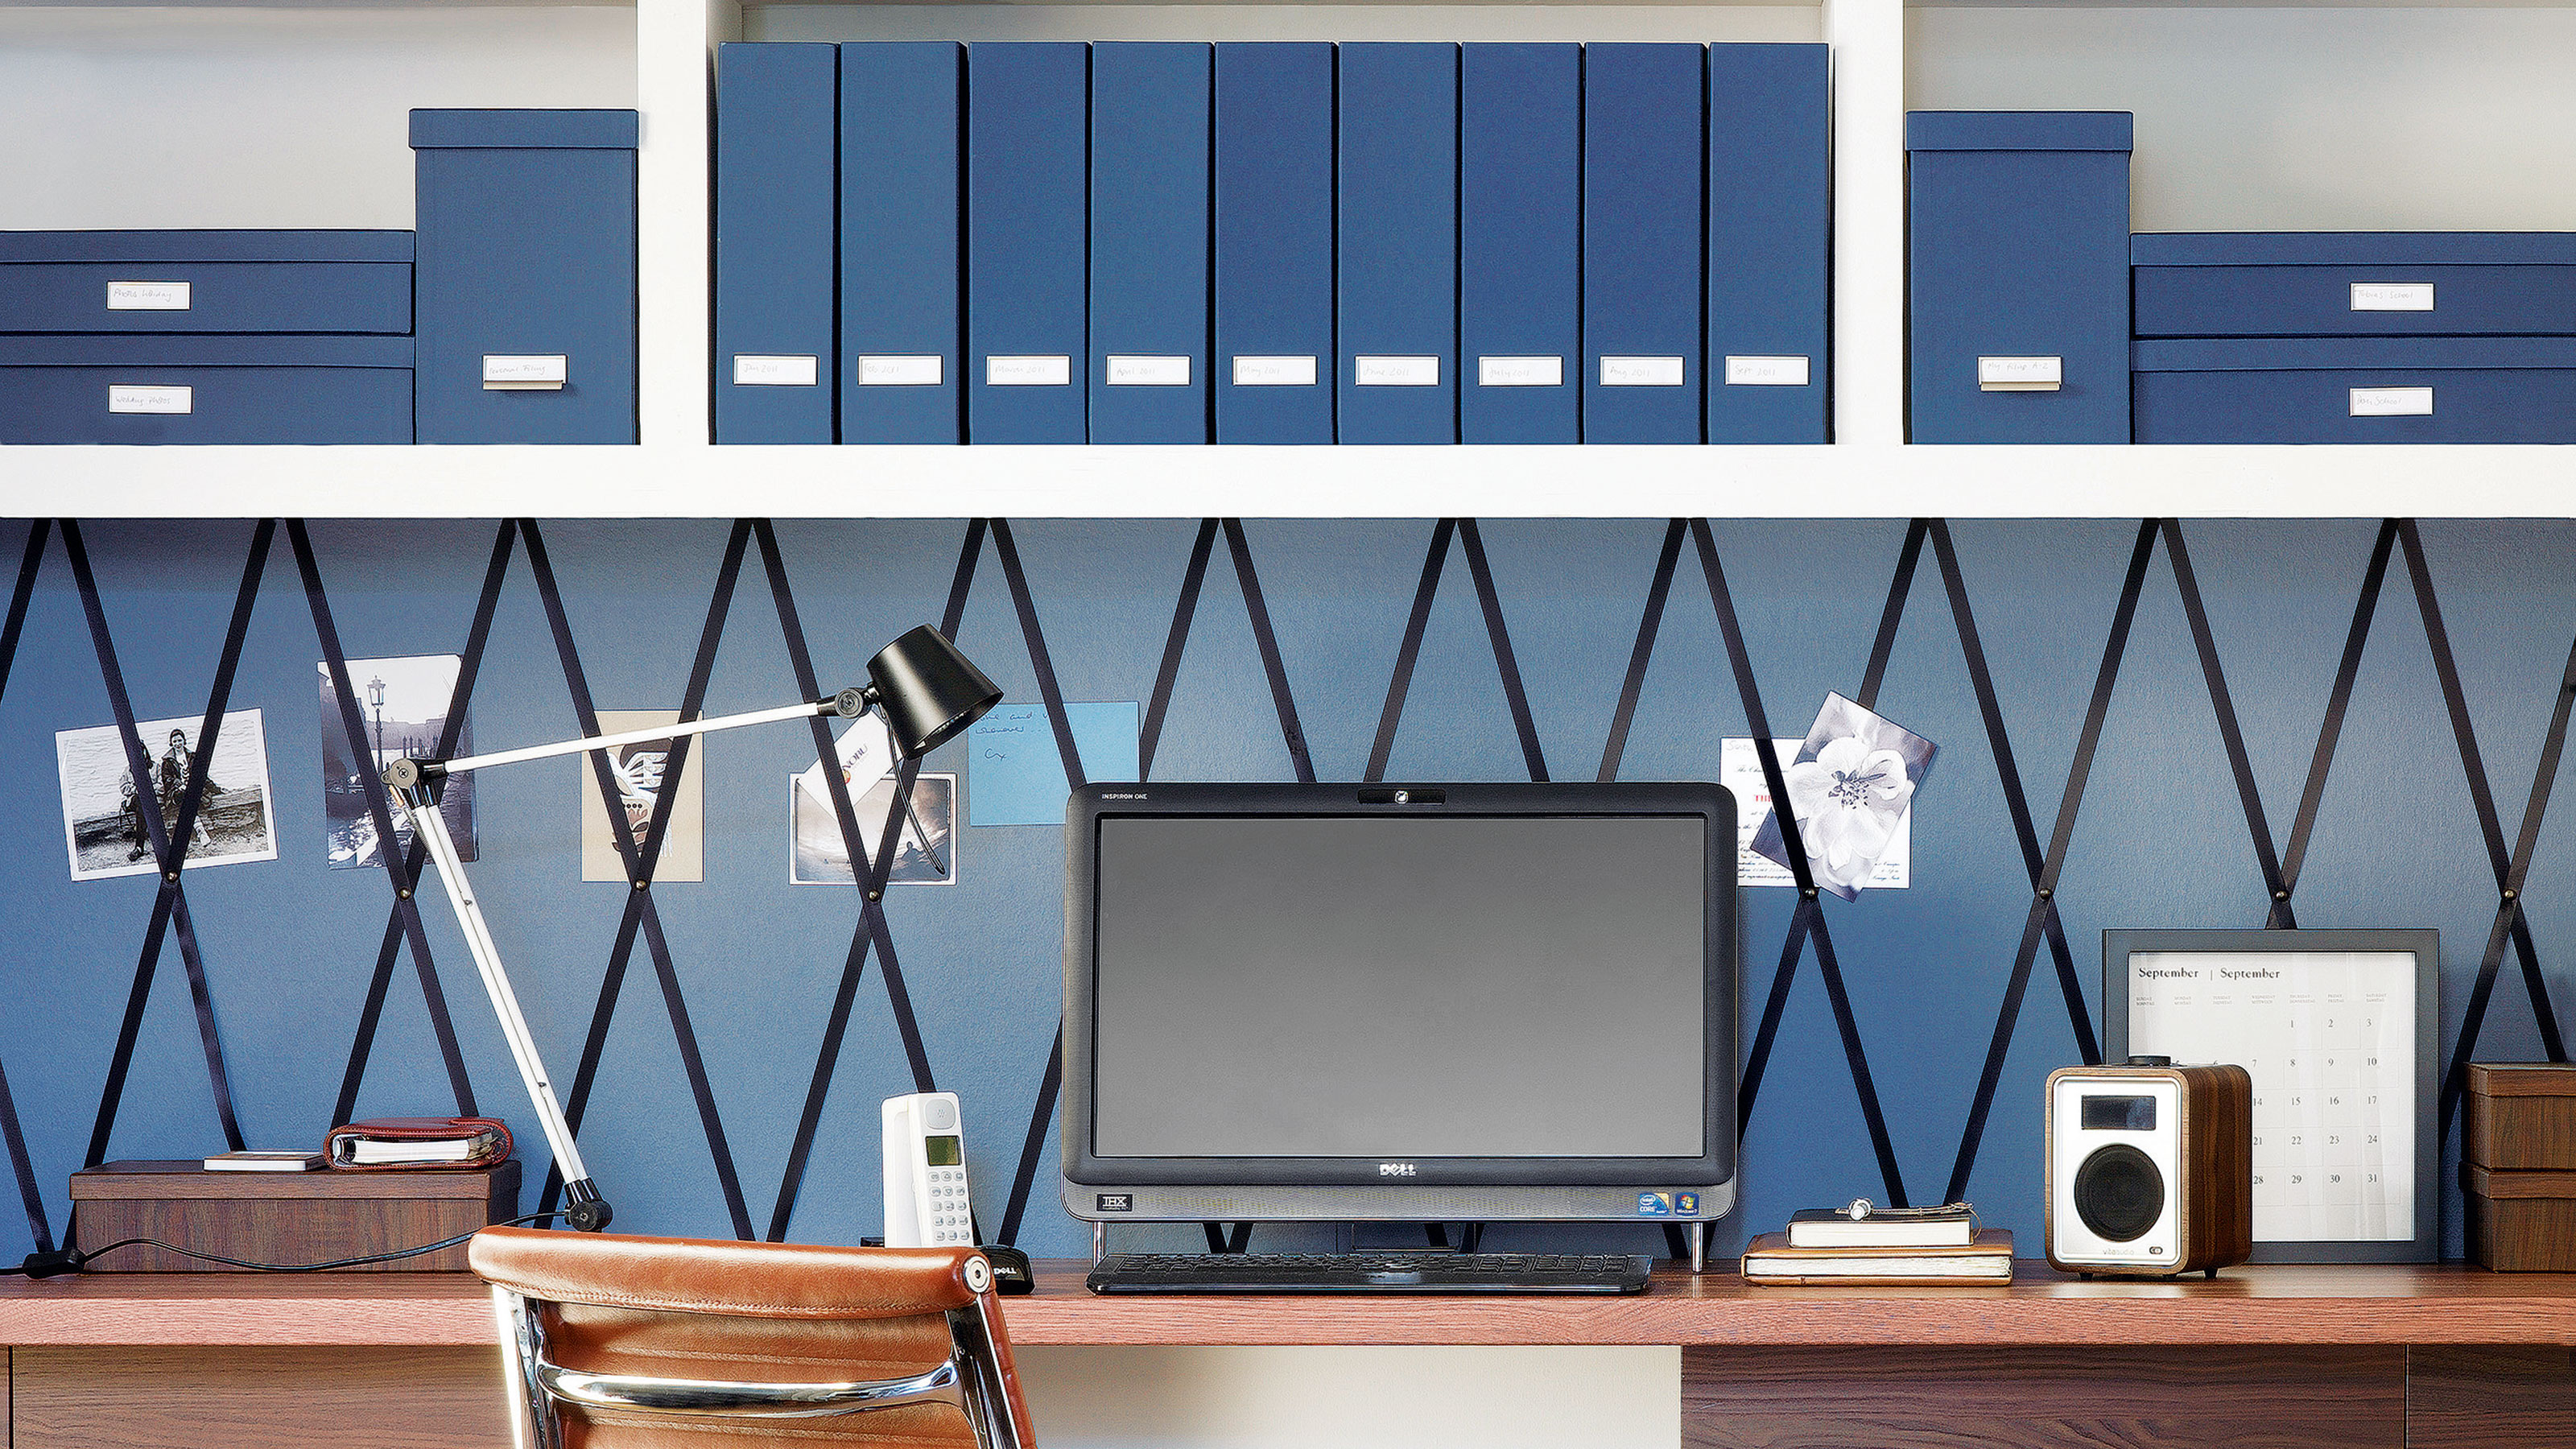 Clever Storage Ideas for Your Home Office